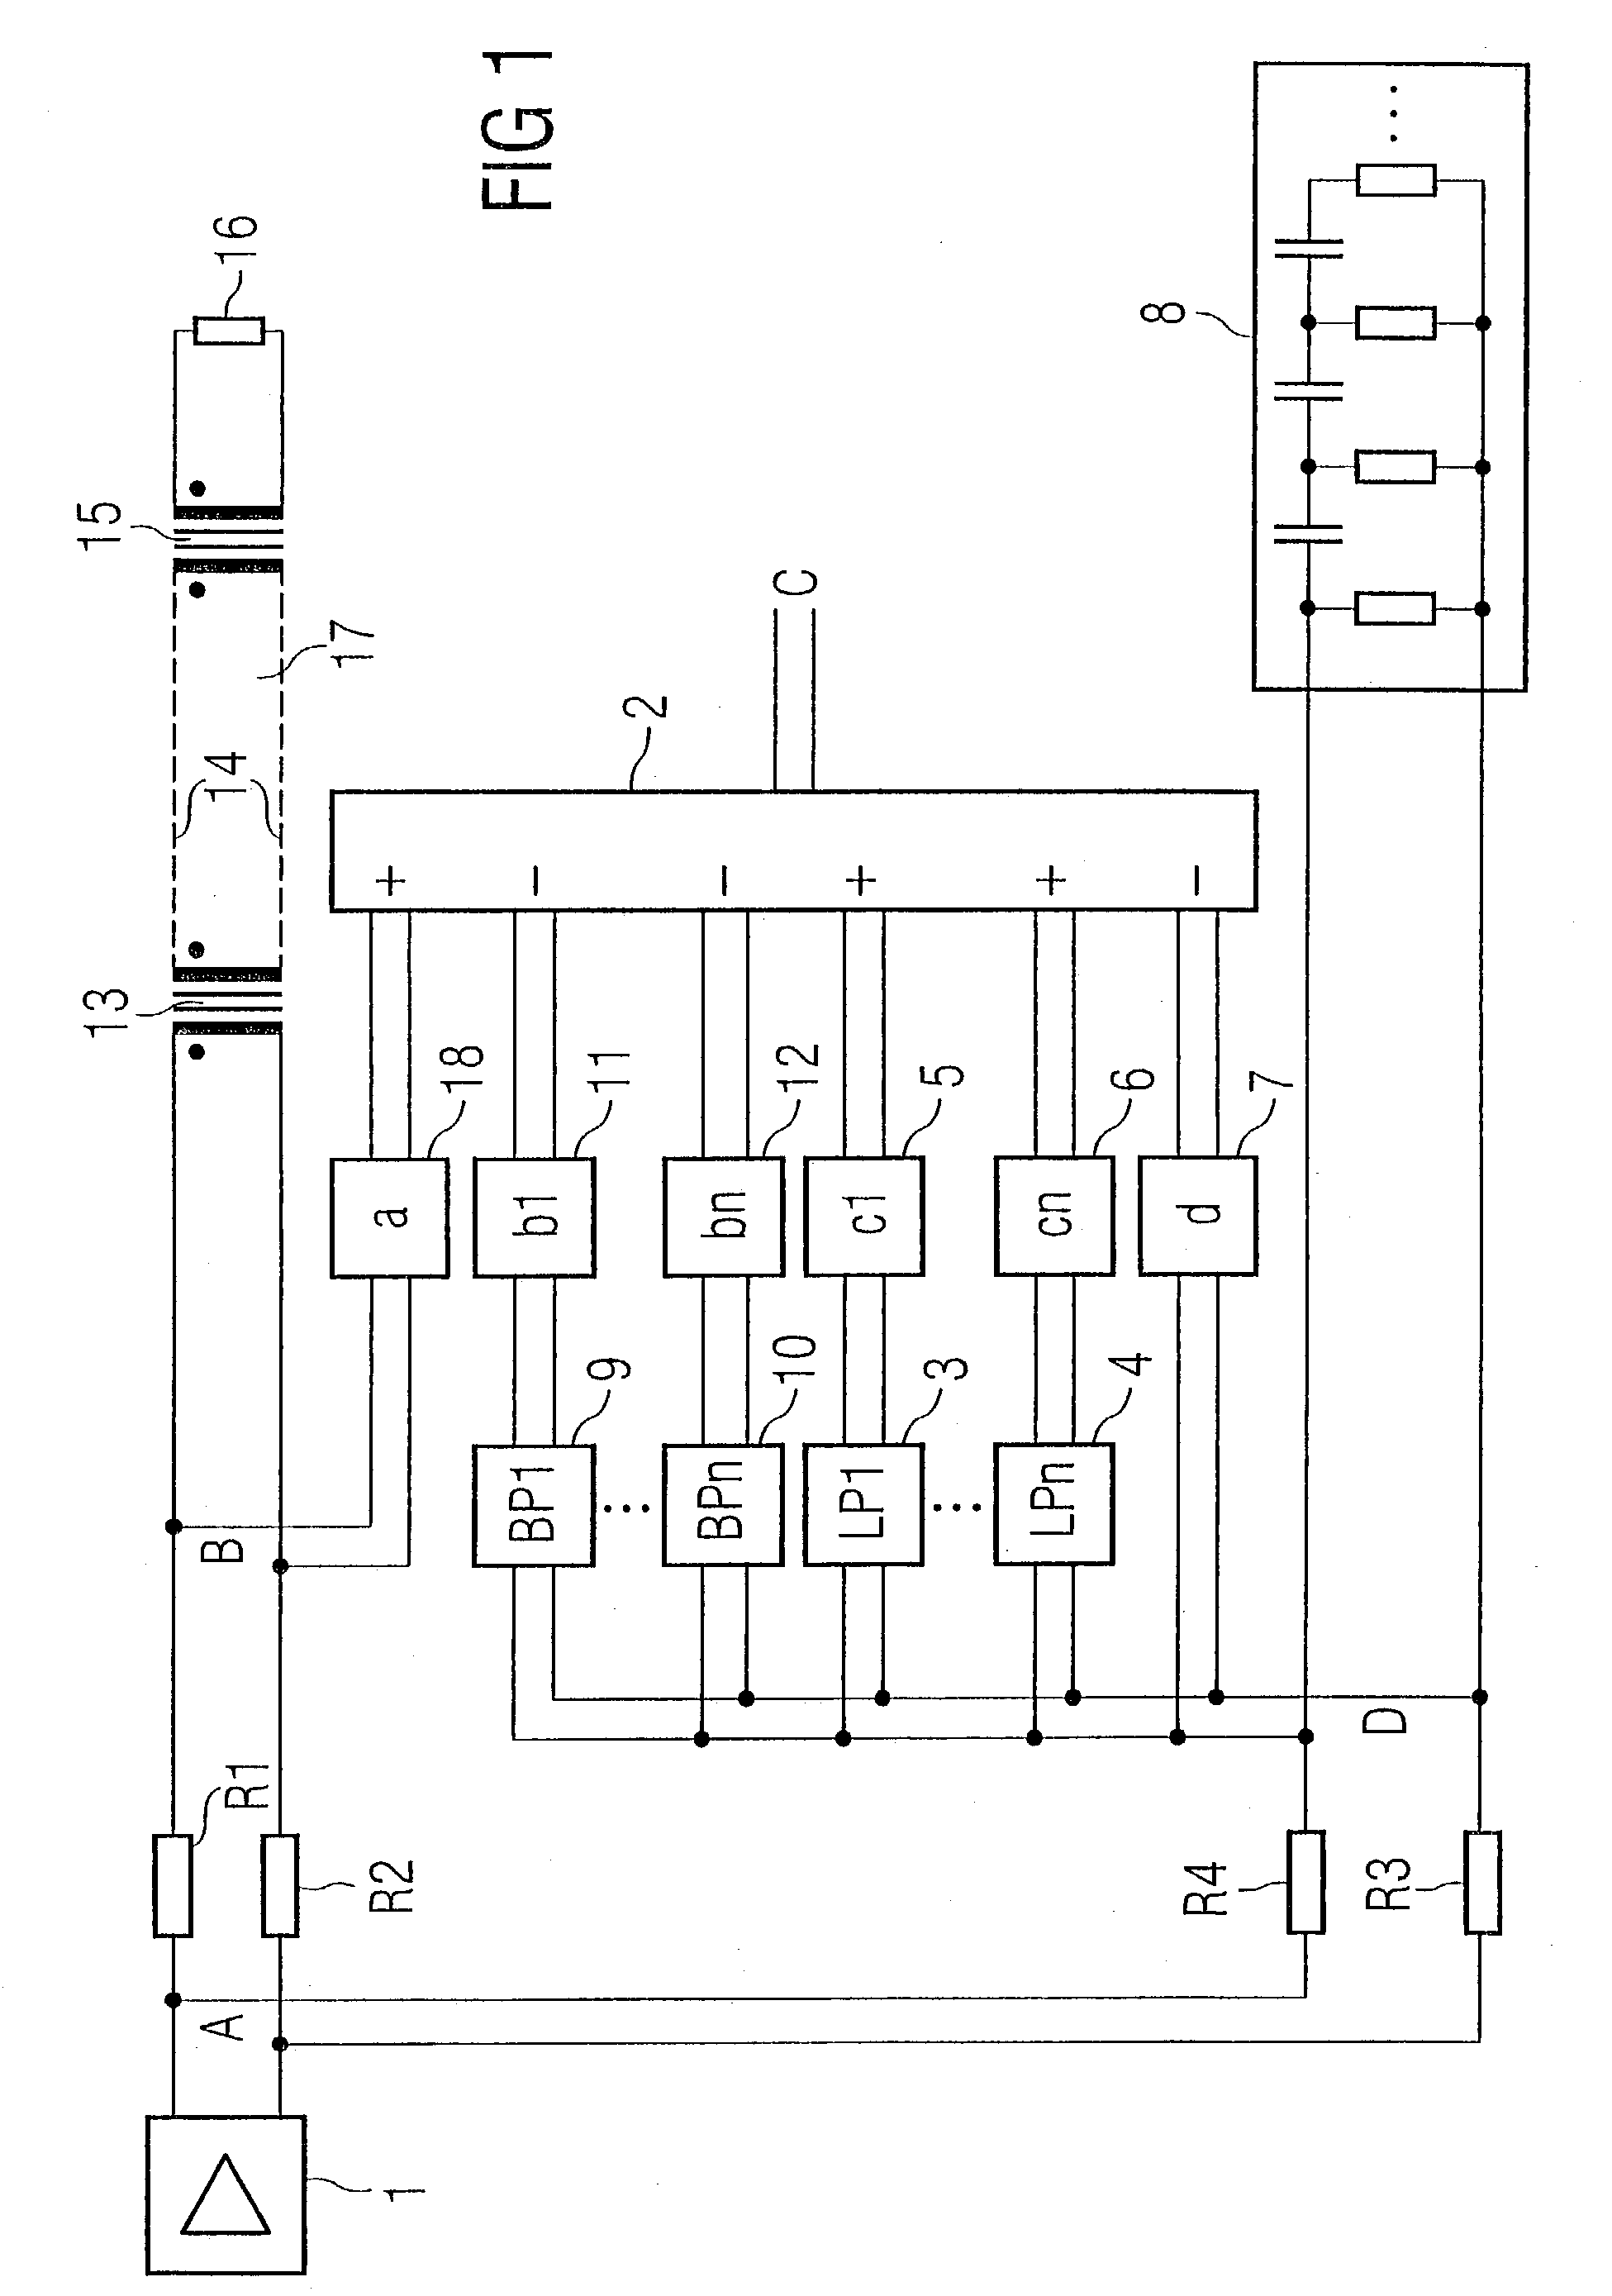 Circuit arrangement for the analogue suppression of echoes